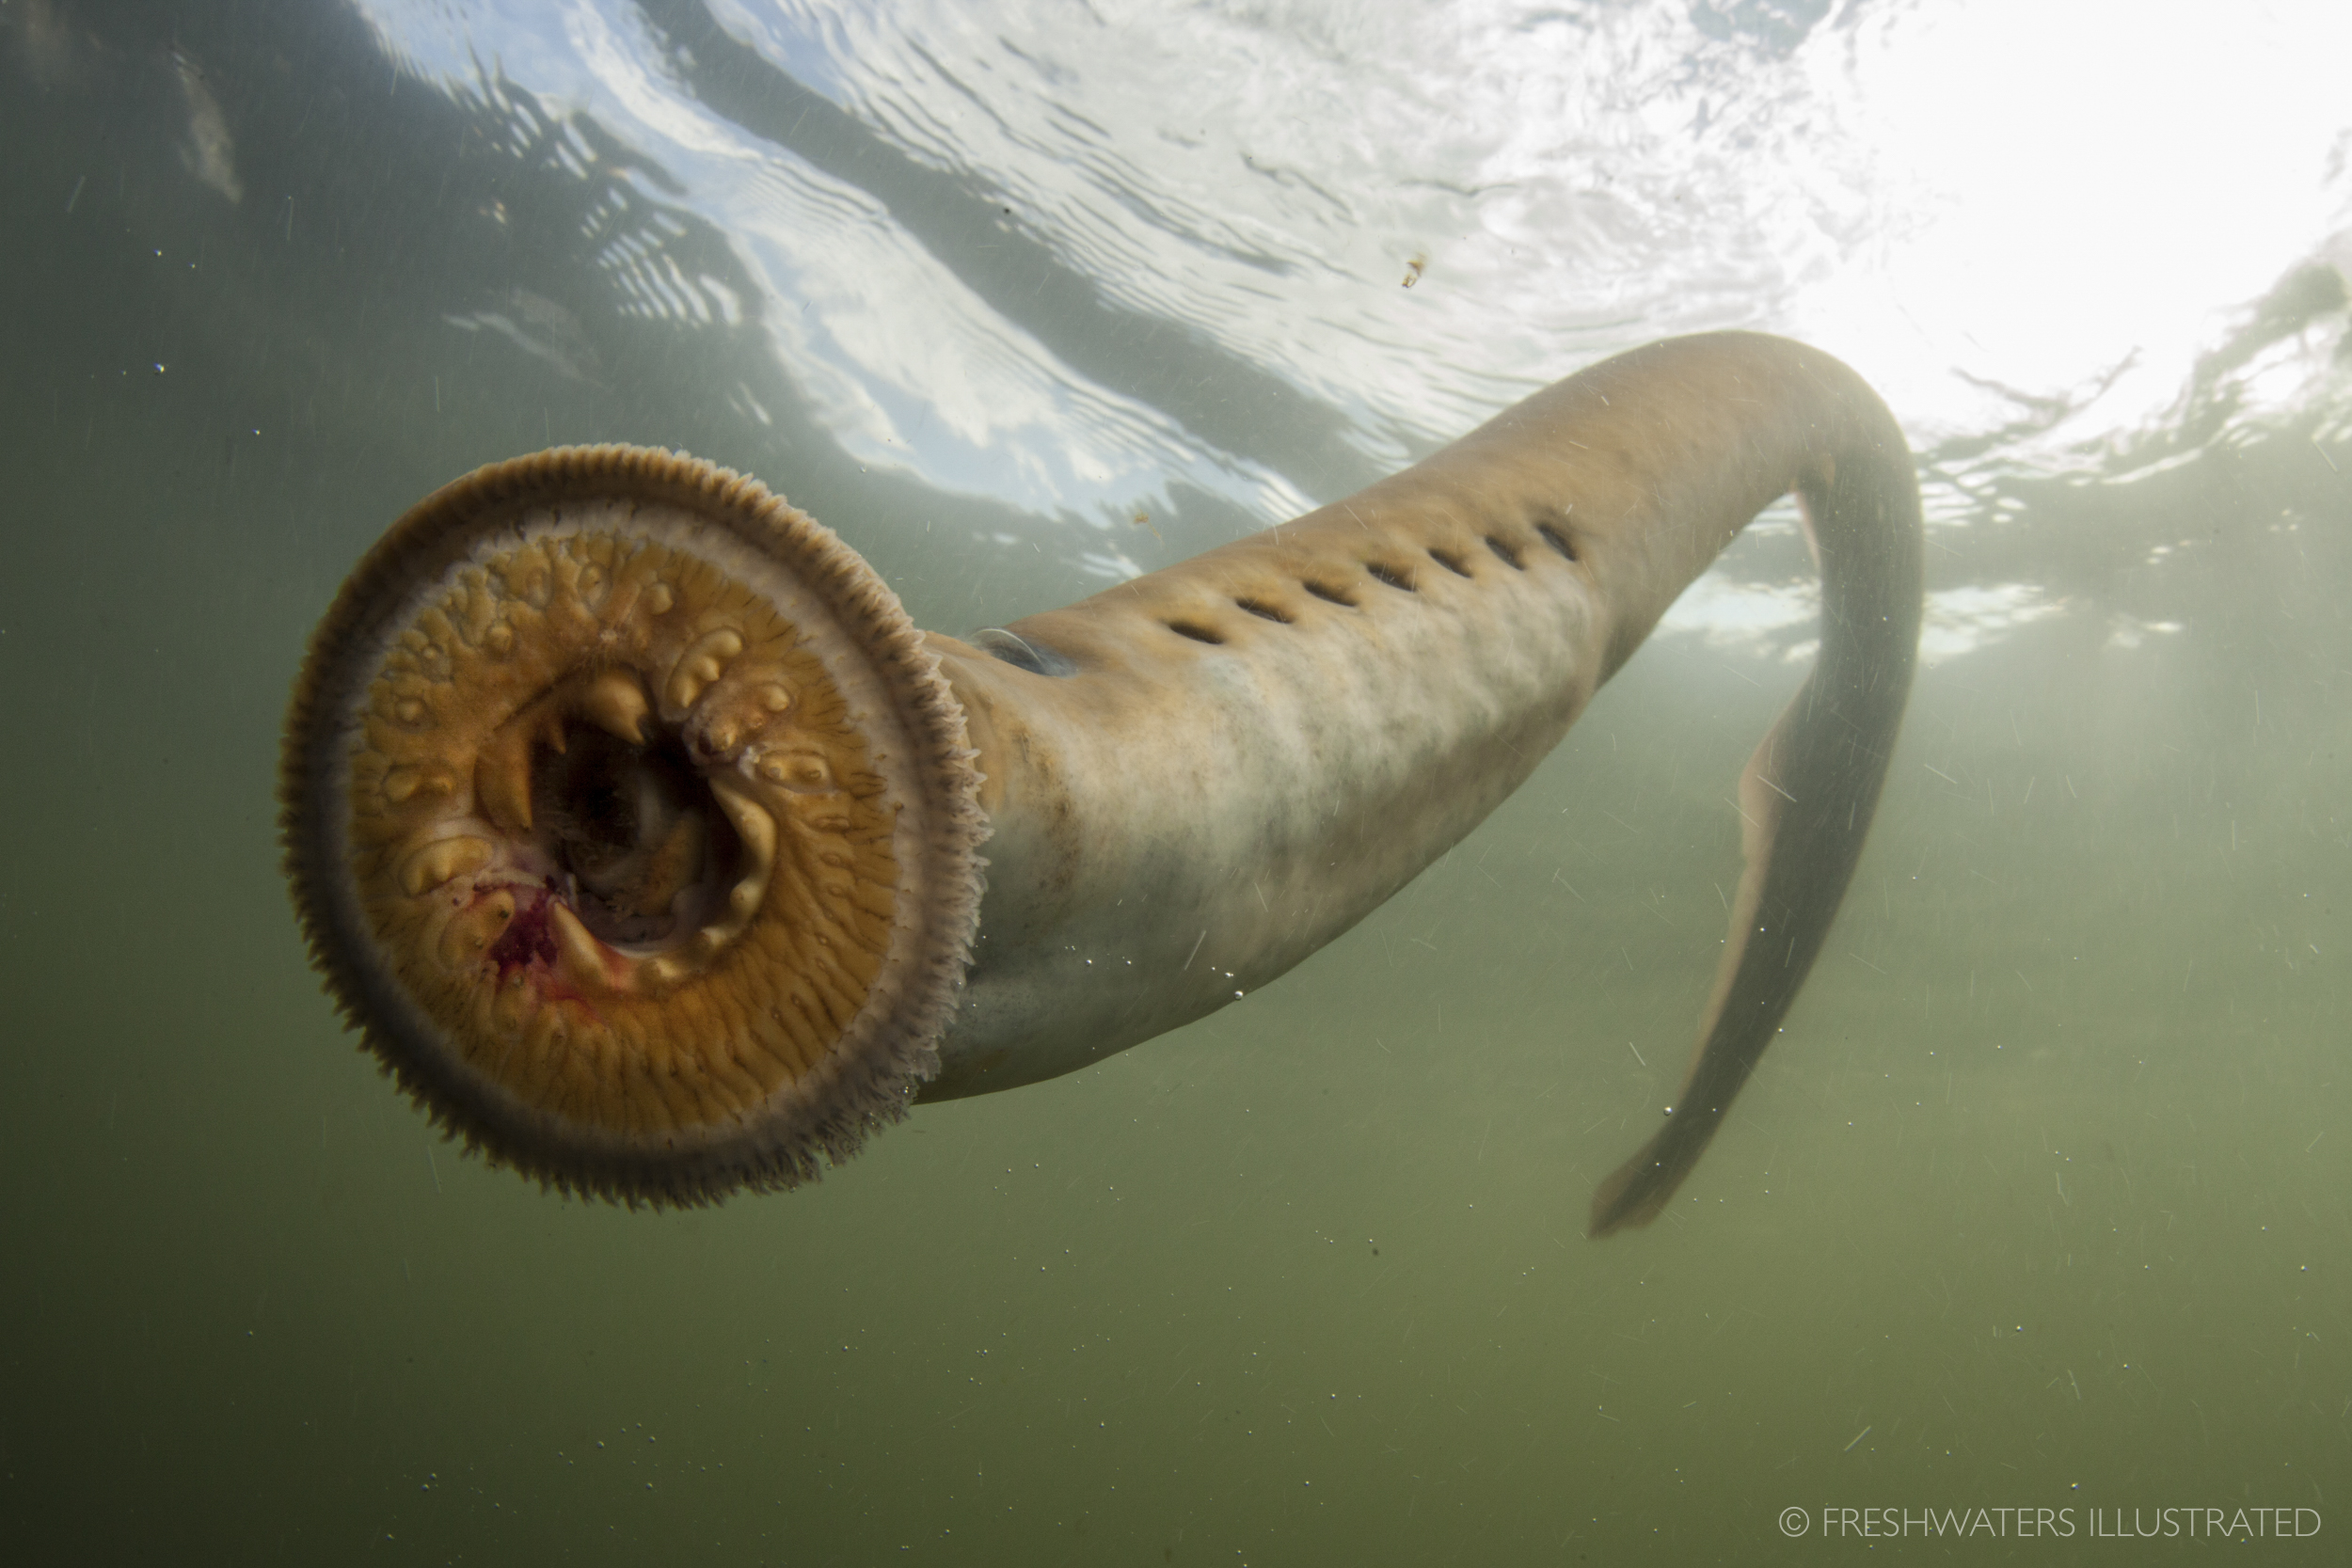  Pacific Lamprey (Lampetra tridentata) are the oldest living lineage of vertebrates, and have changed very little over the last 450 million years. Unfortunately, dams and pollutants have caused populations of this ancient fish species to crash throug